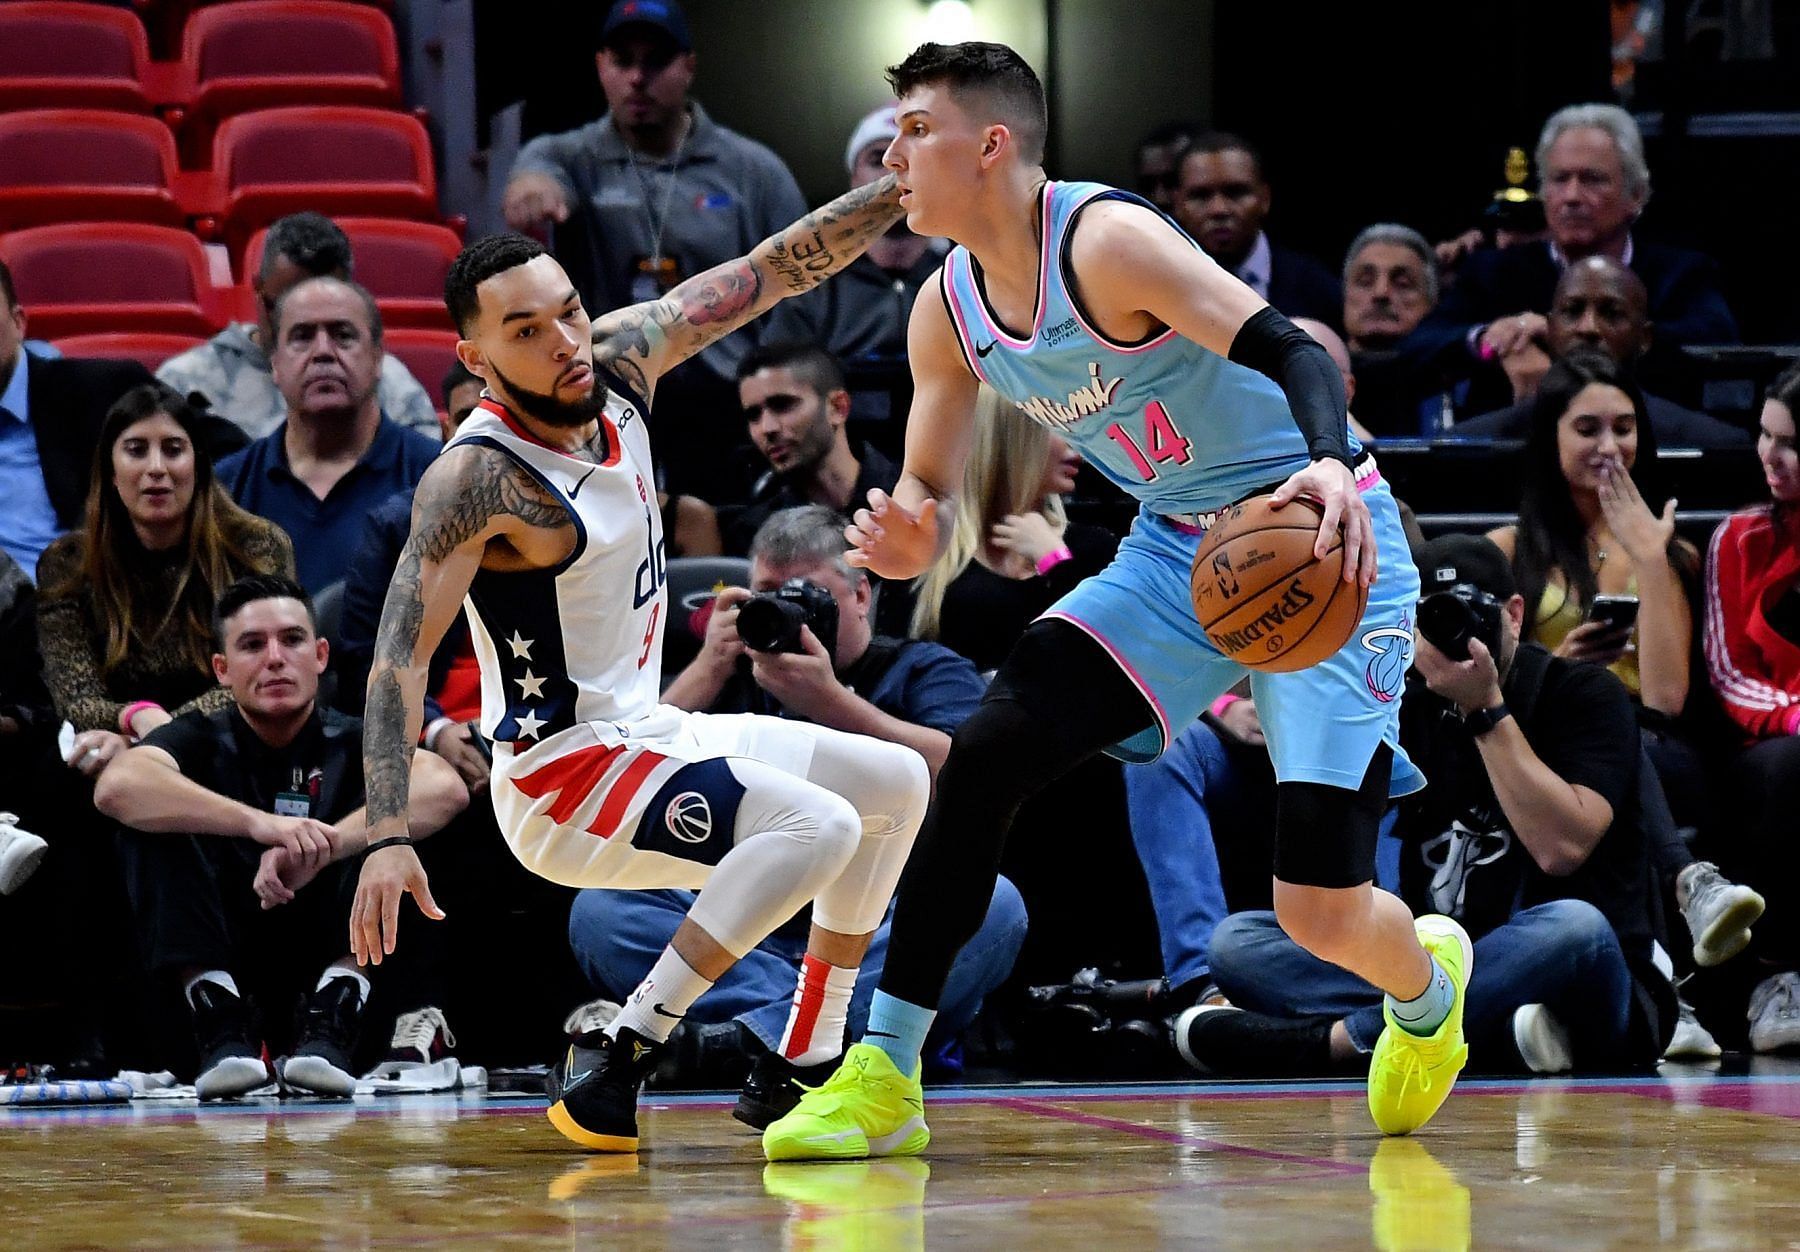 Tyler Herro missed the first game between the Washington Wizards and the Miami Heat due to a bruised right wrist [Photo: Heat Nation]